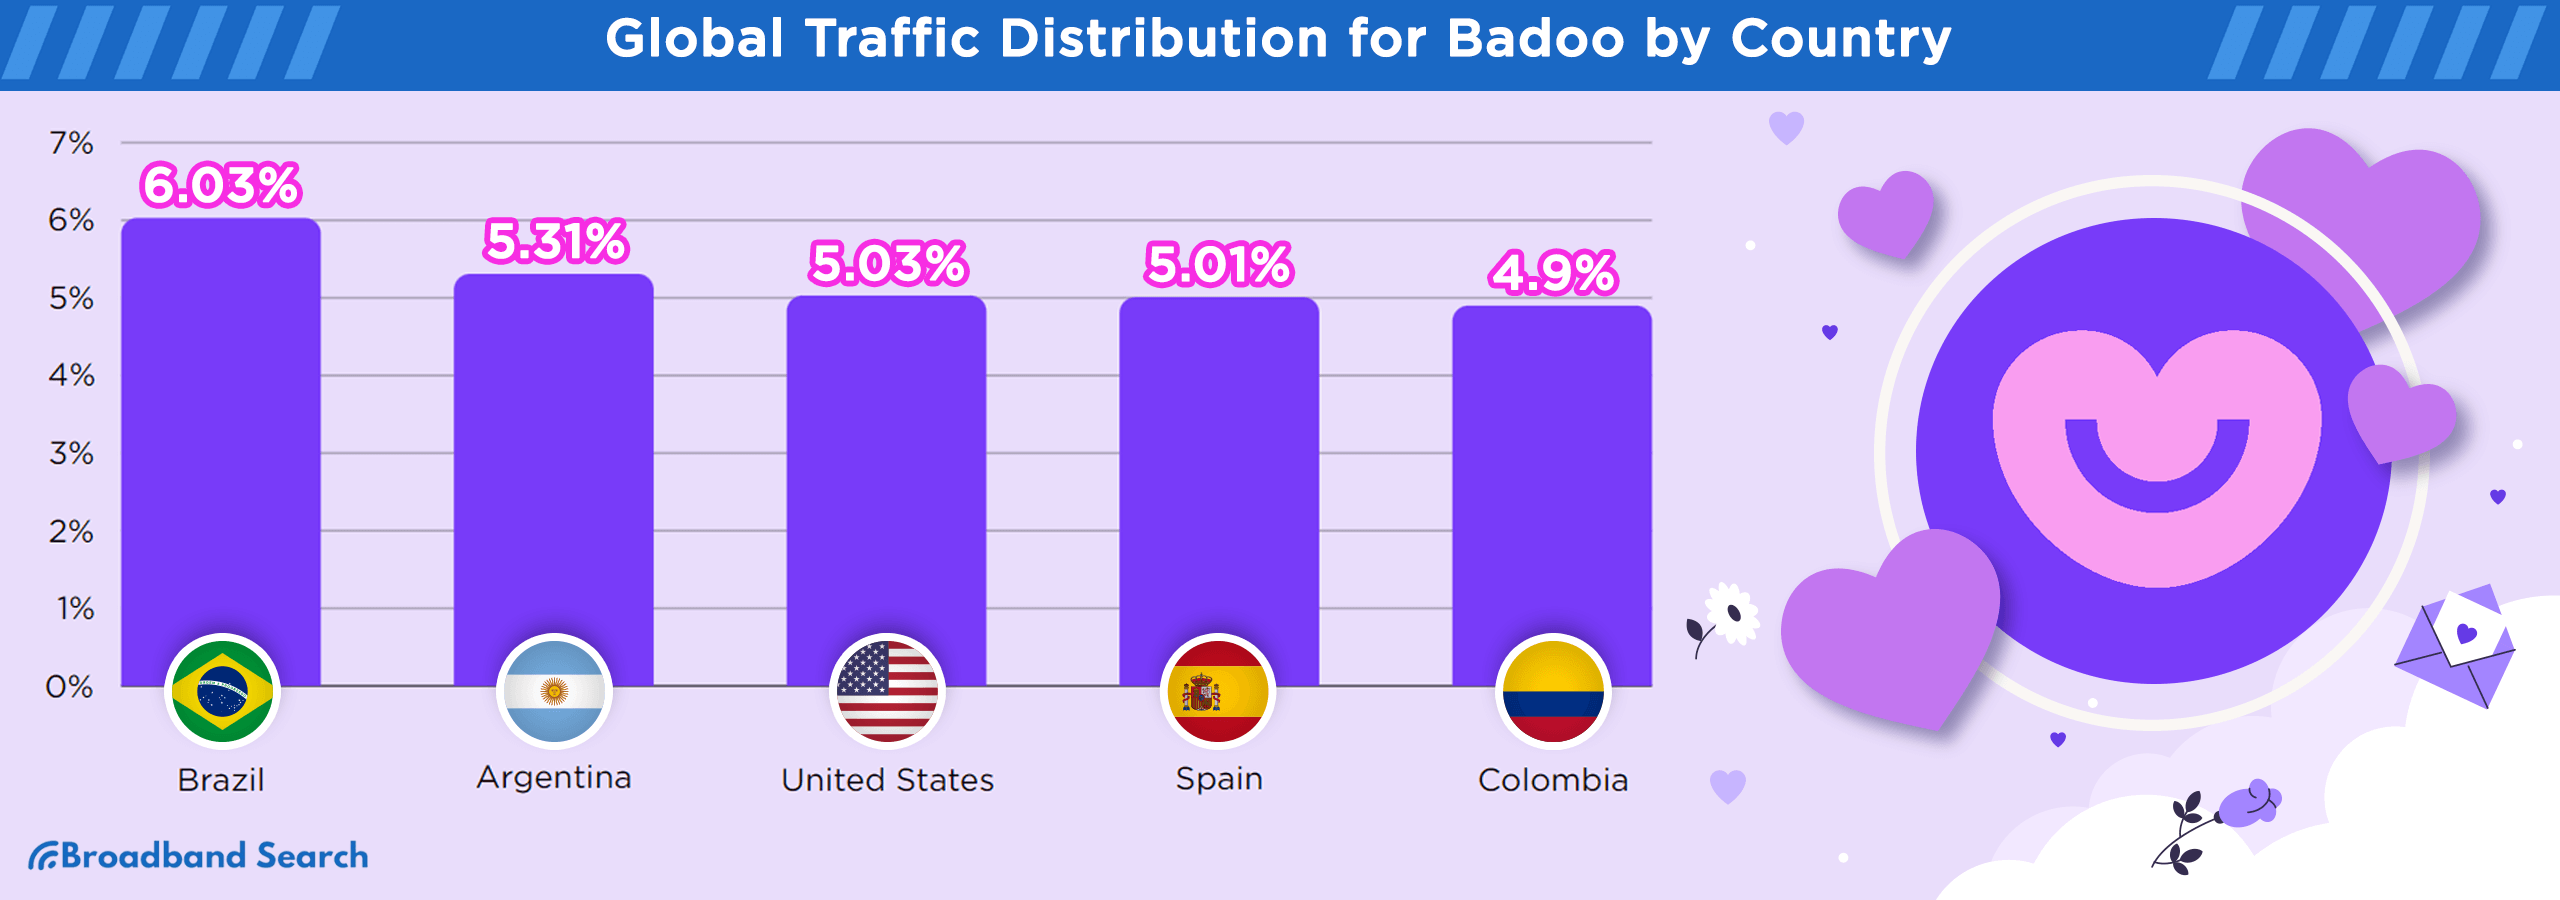 Badoo's global user traffic distribution by country